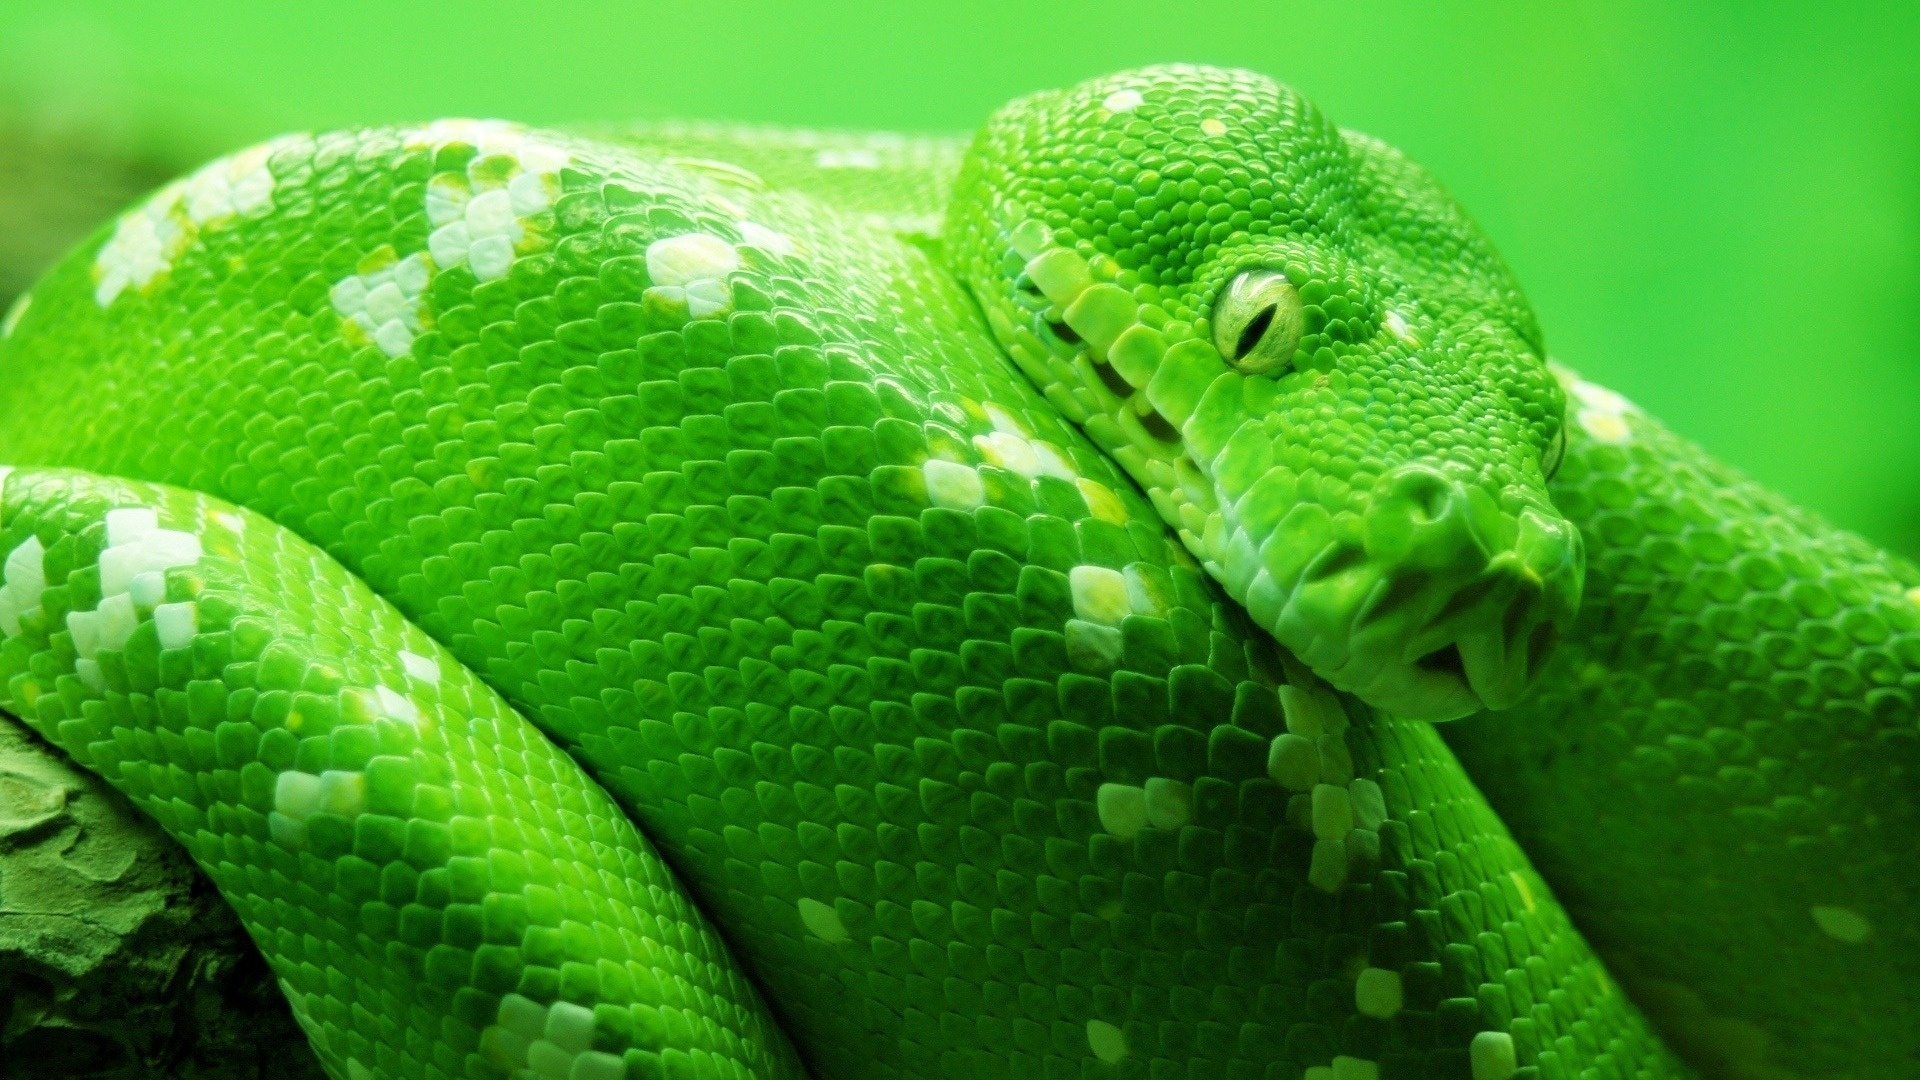 snake wallpaper,reptile,green,smooth greensnake,scaled reptile,serpent